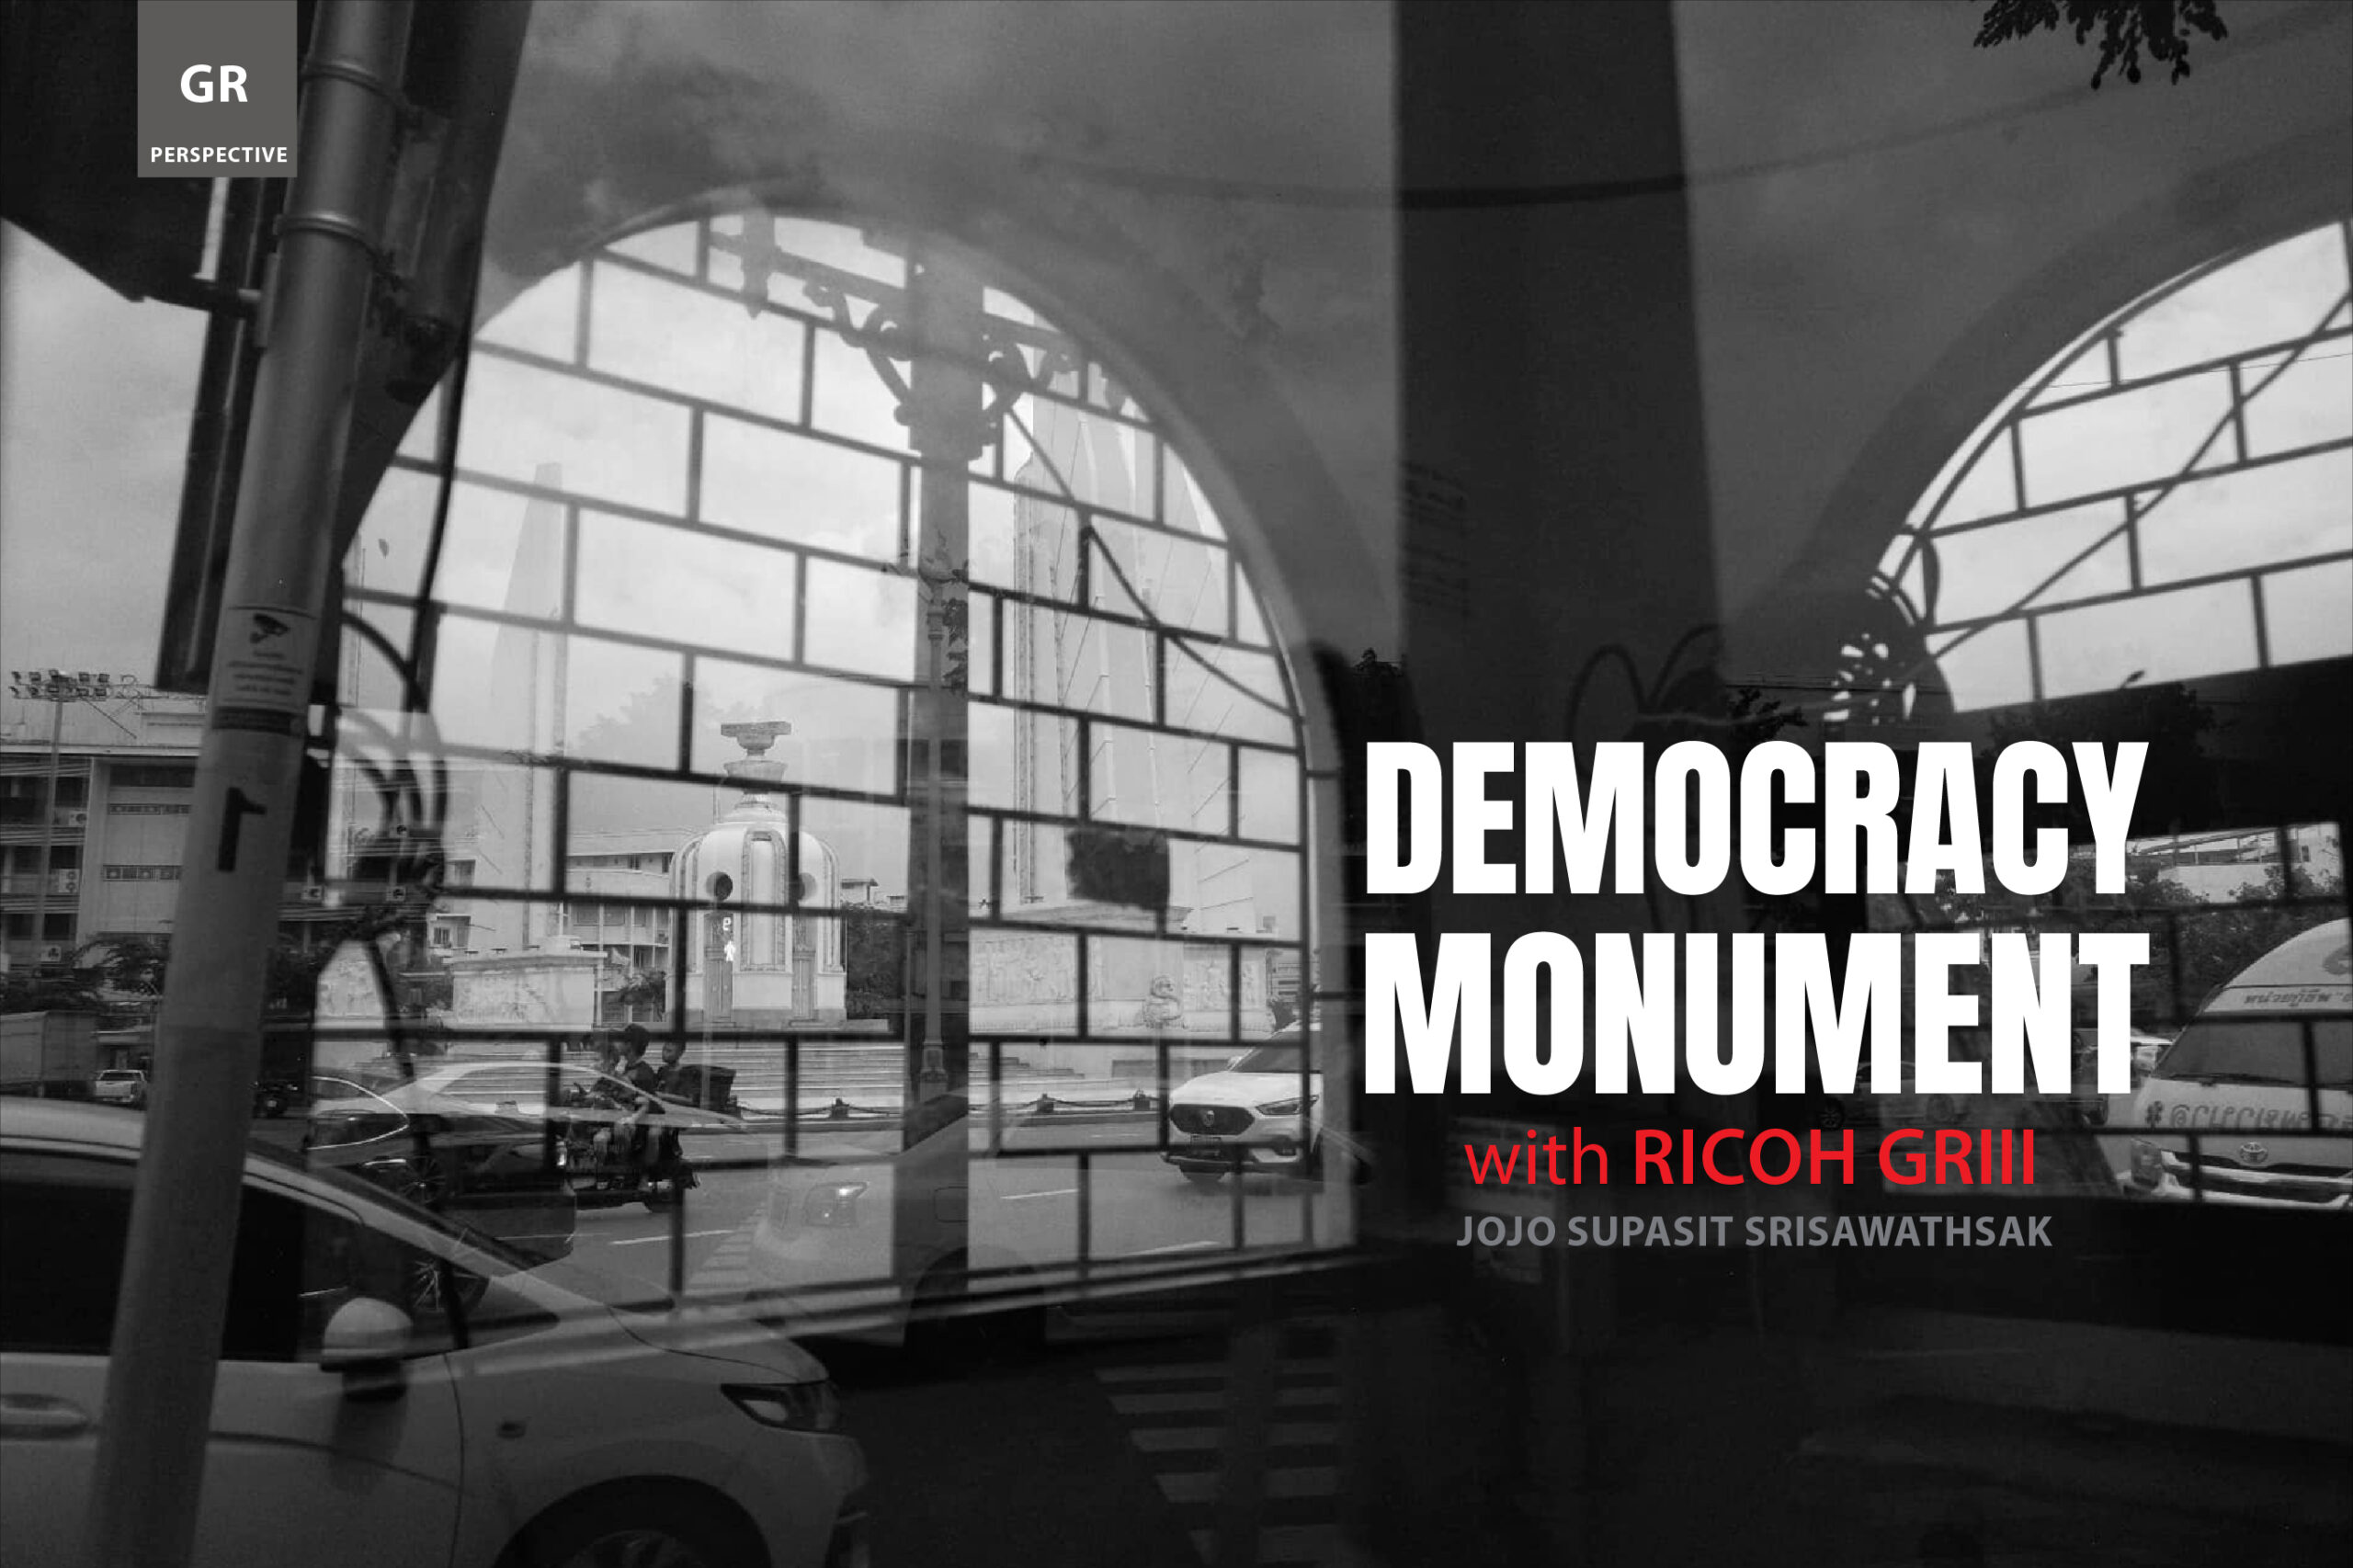 GR PERSPECTIVE : DEMOCRACY MONUMENT with RICOH GRIII